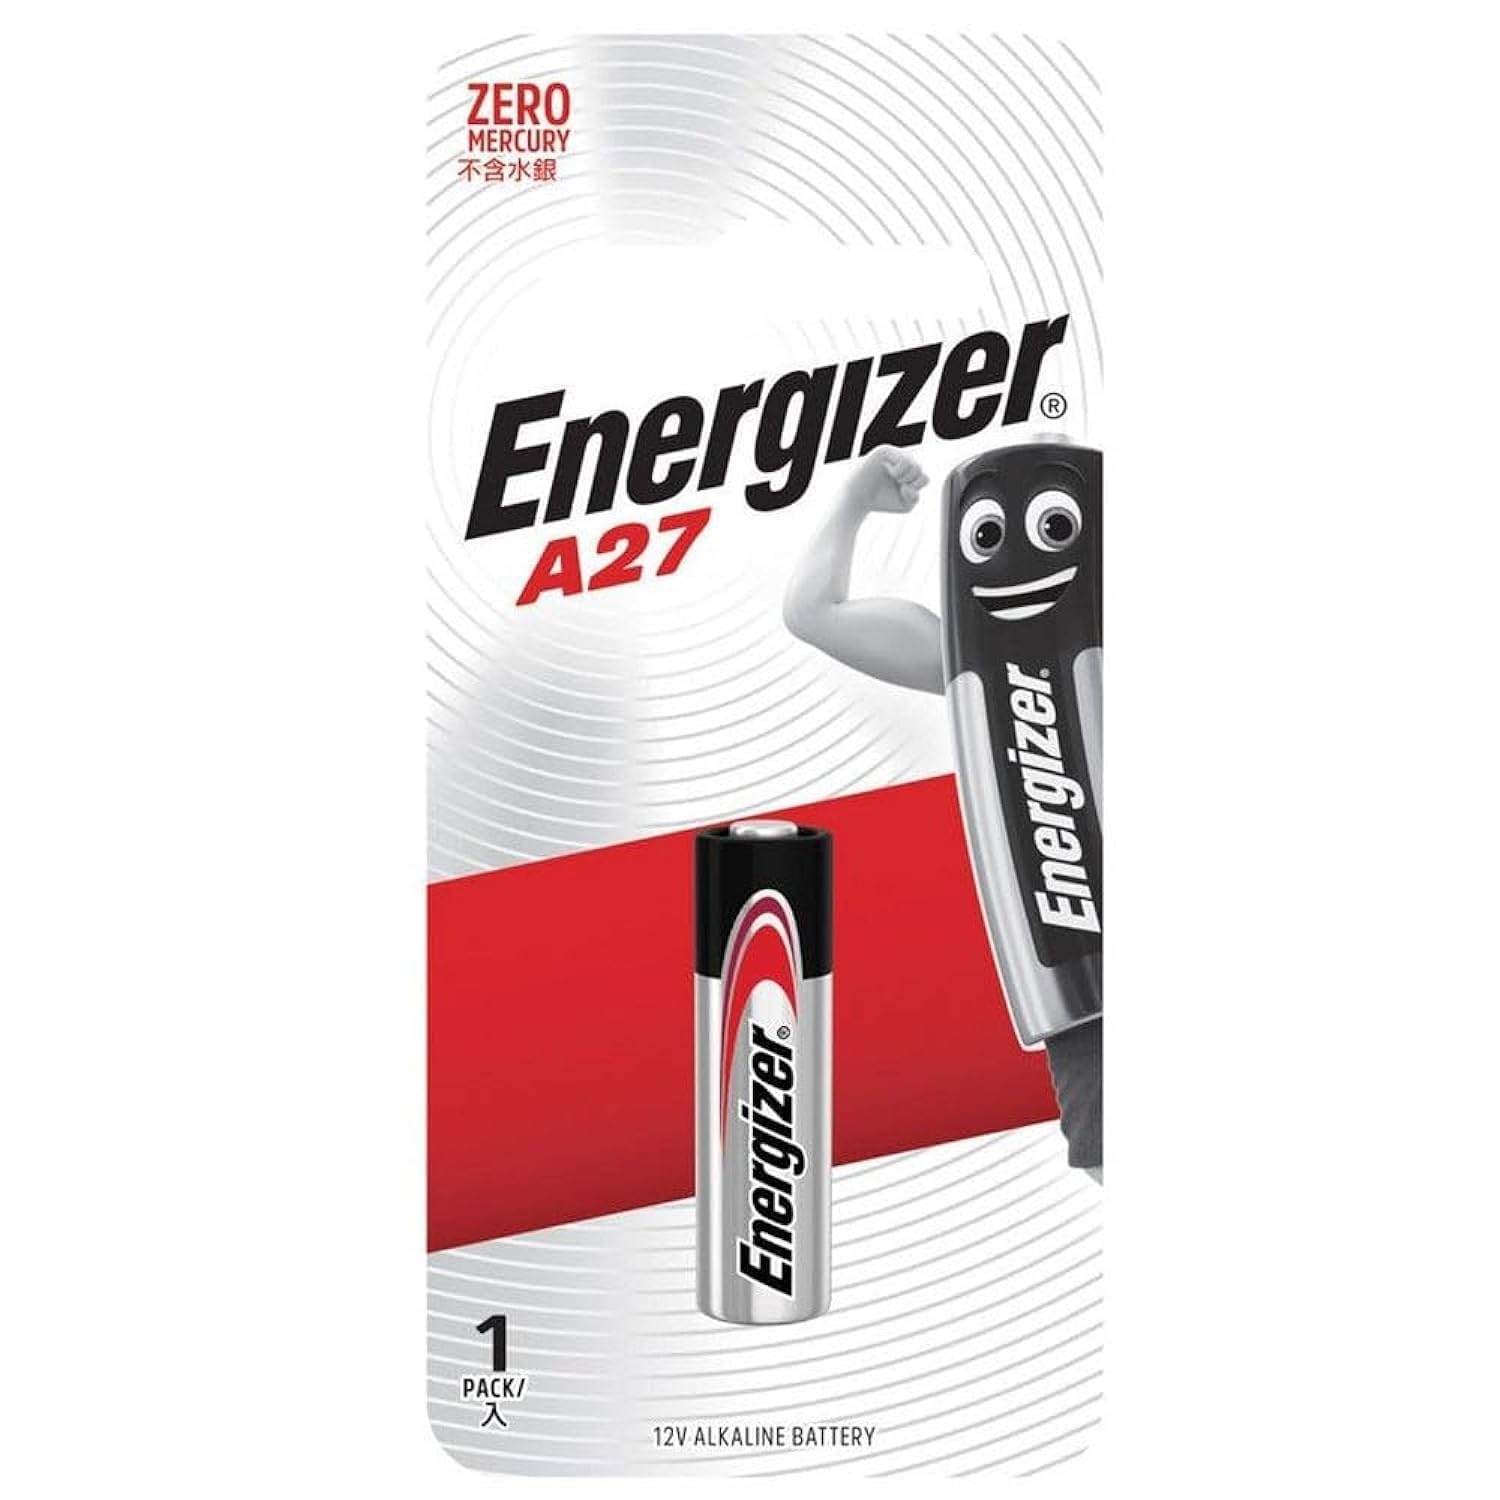 Energizer 12V Alkaline Battery A27 BP1 Replacement for 27A, A27BP, G27A, GP27A, L828, MN27 batteries